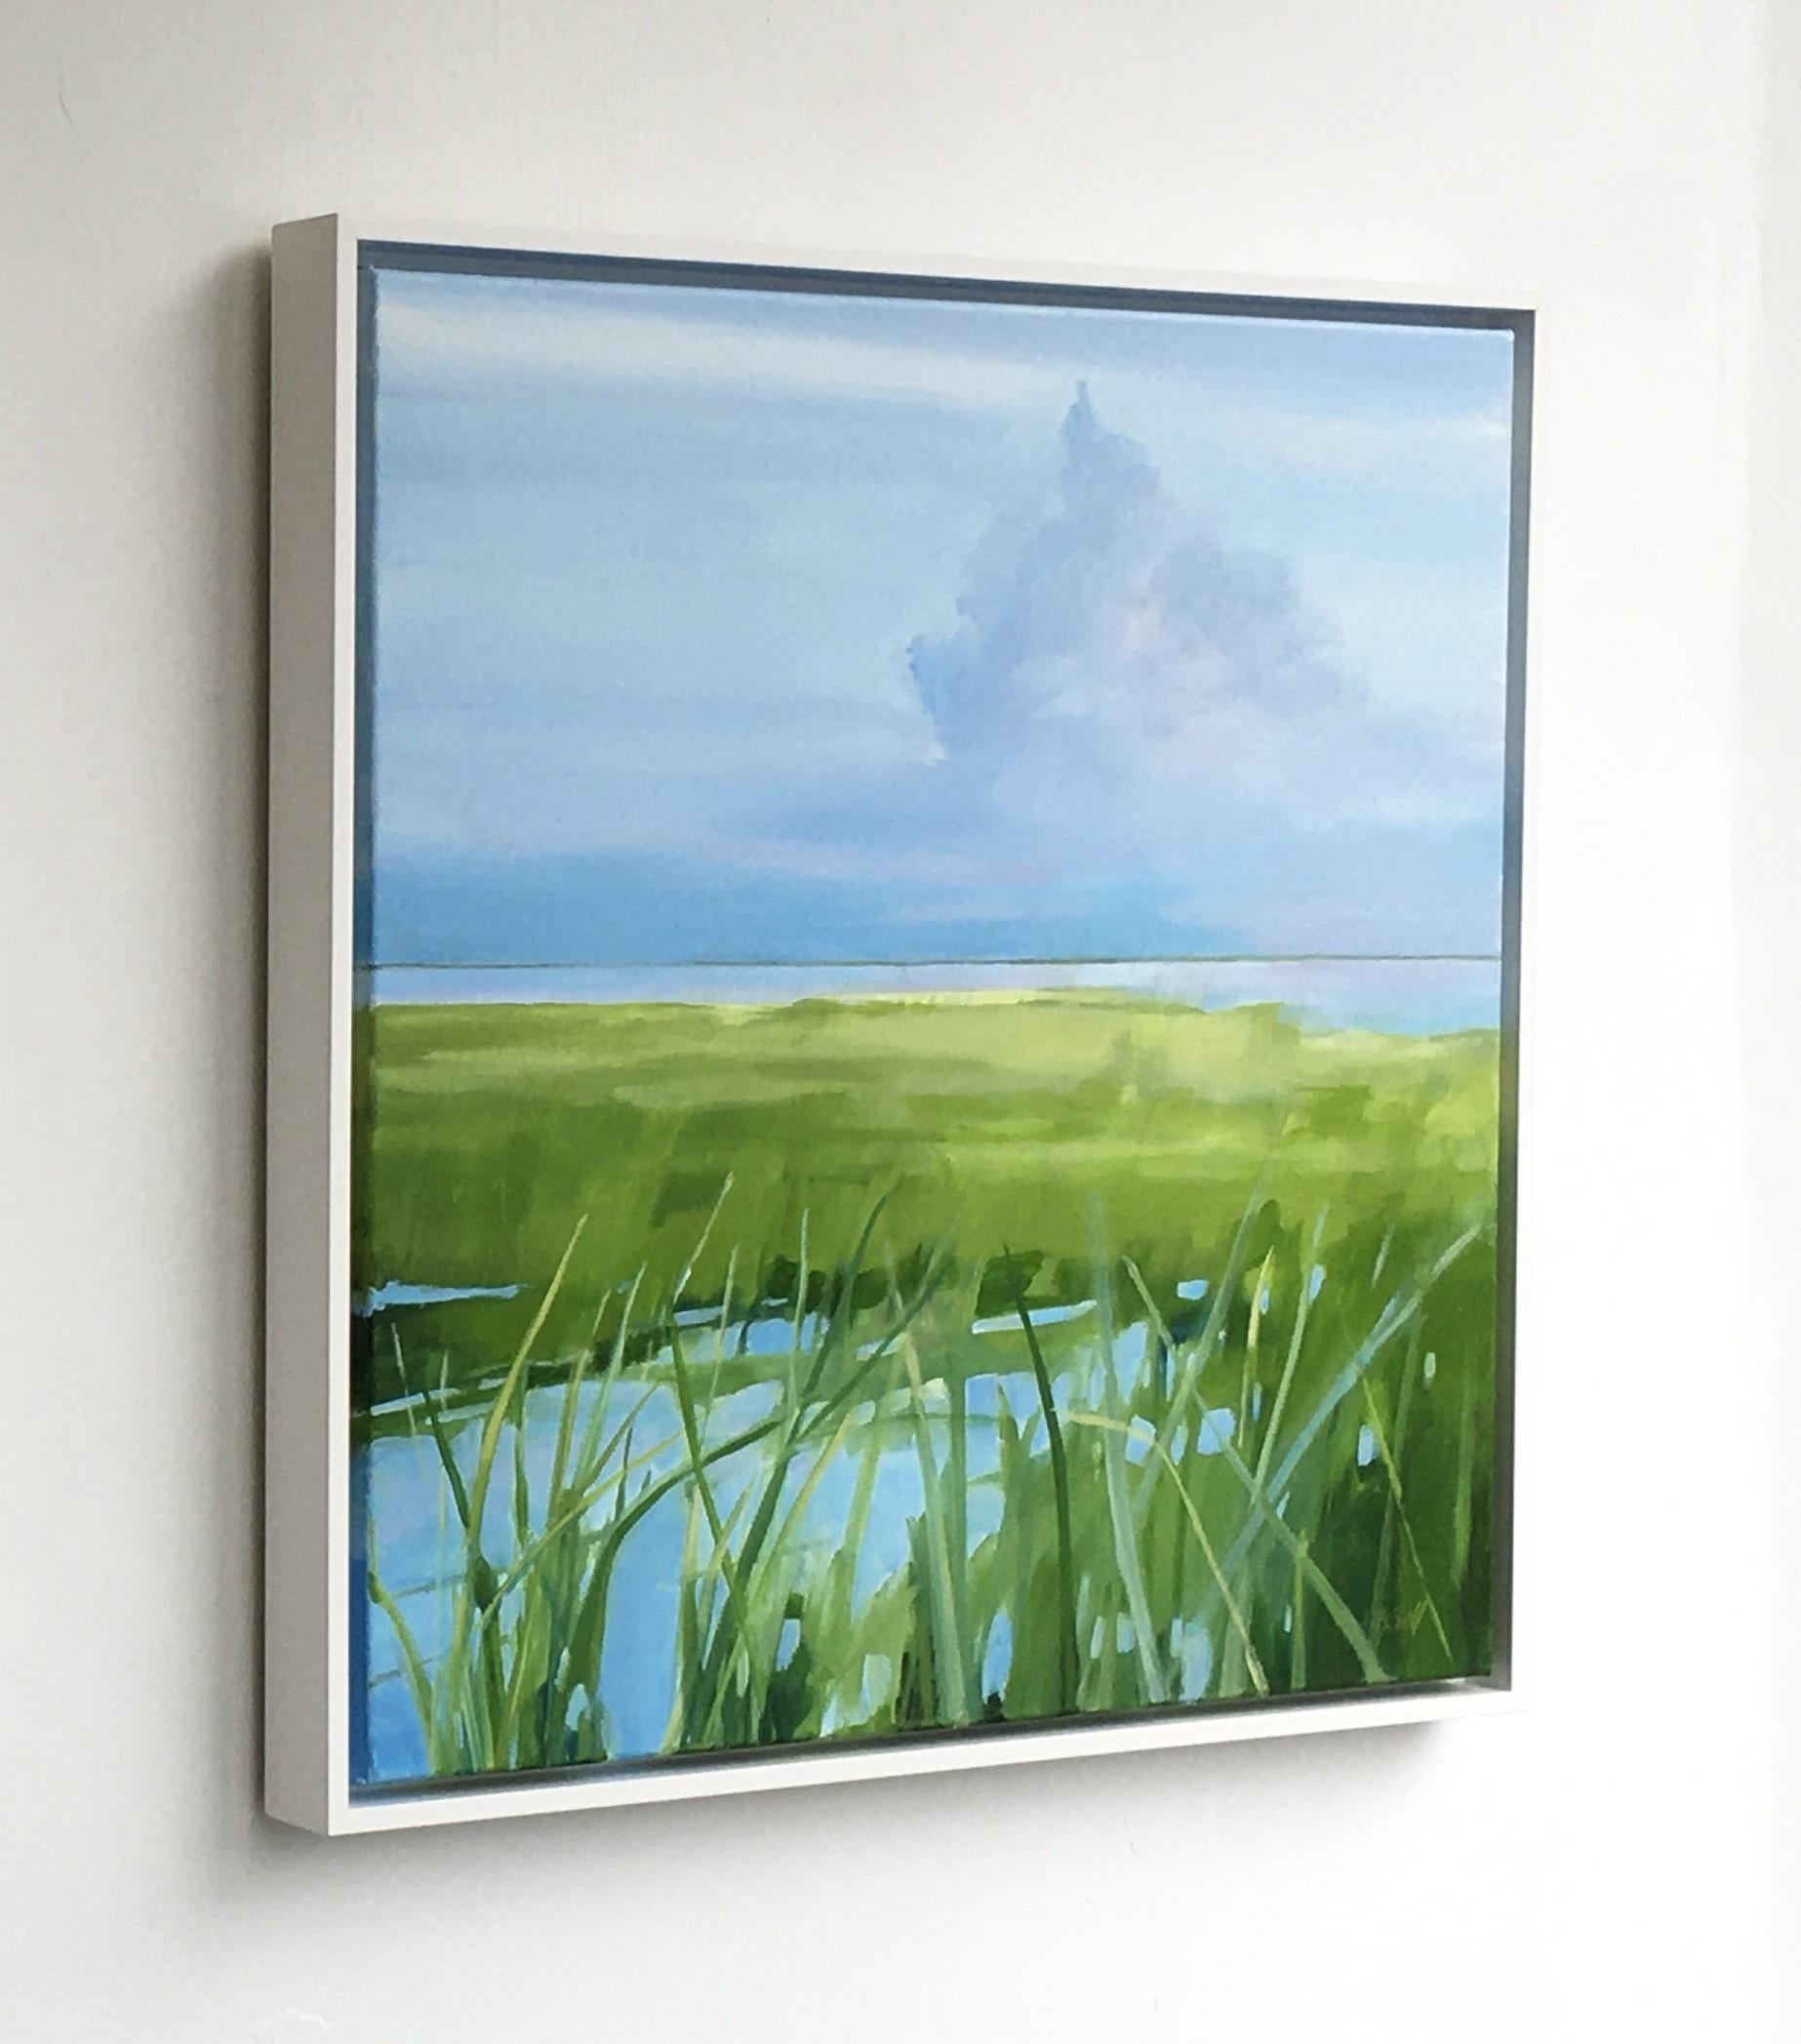 Betty Ball Landscape Painting - Water's Edge, Waterscape, Blue, Water, Seascape, Grassy, Green